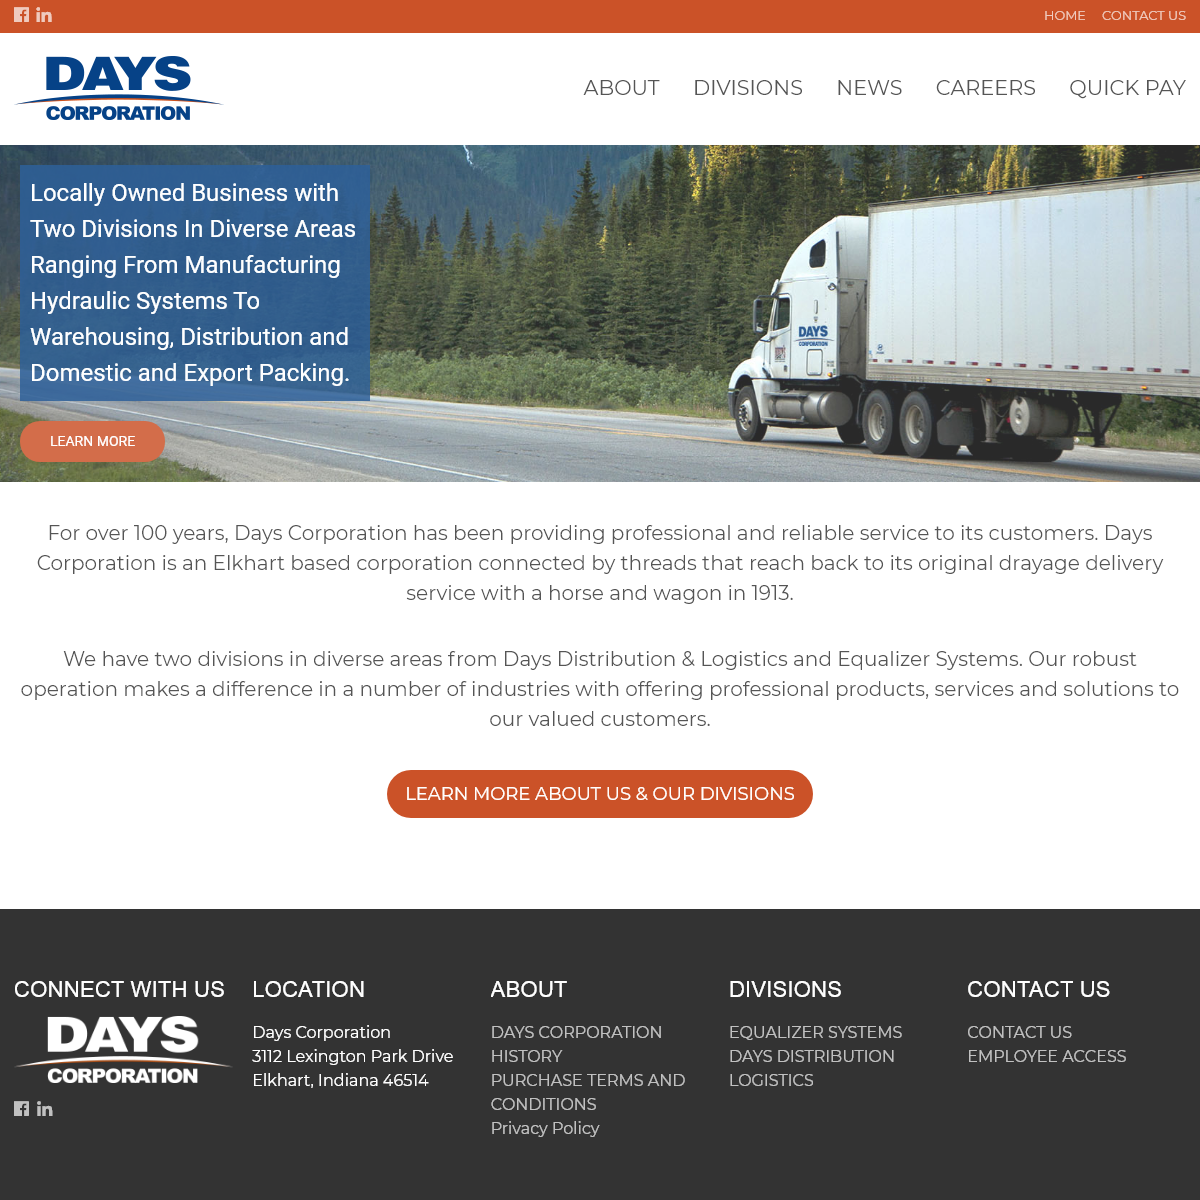 A complete backup of dayscorp.com